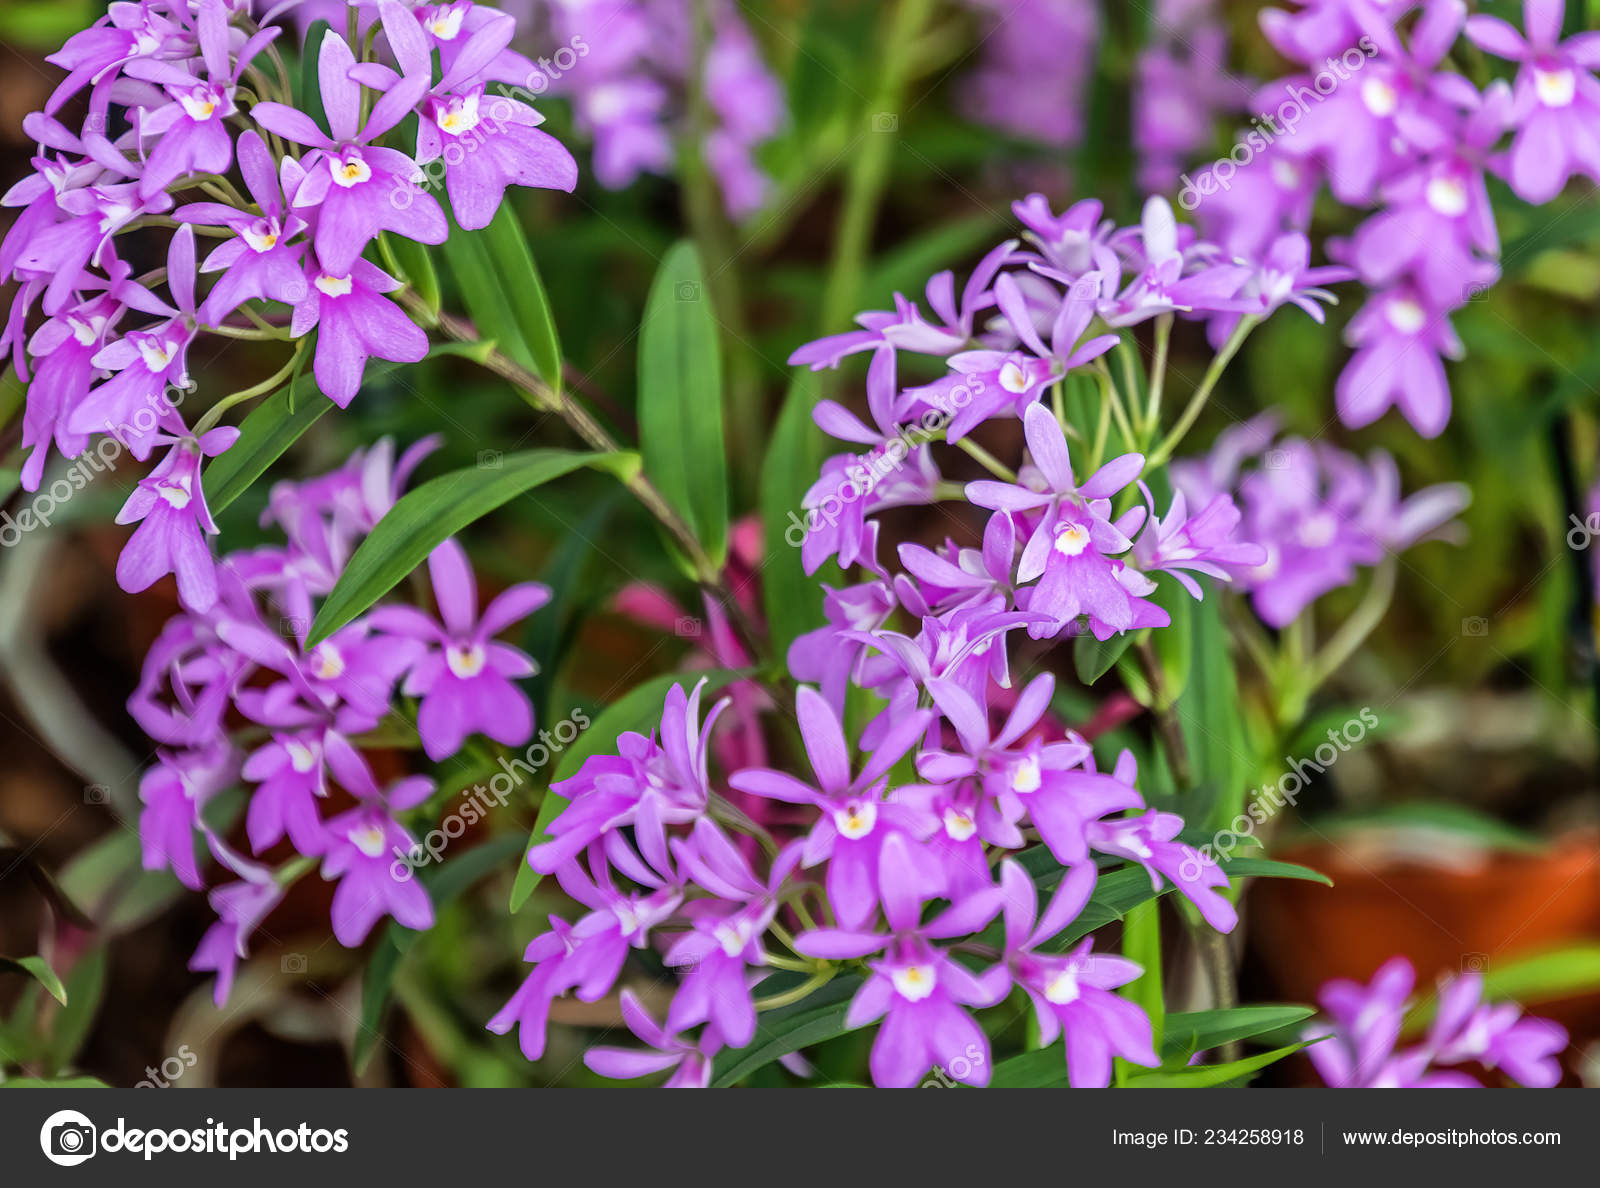 Epidendrum orchids Stock Photos, Royalty Free Epidendrum orchids Images |  Depositphotos